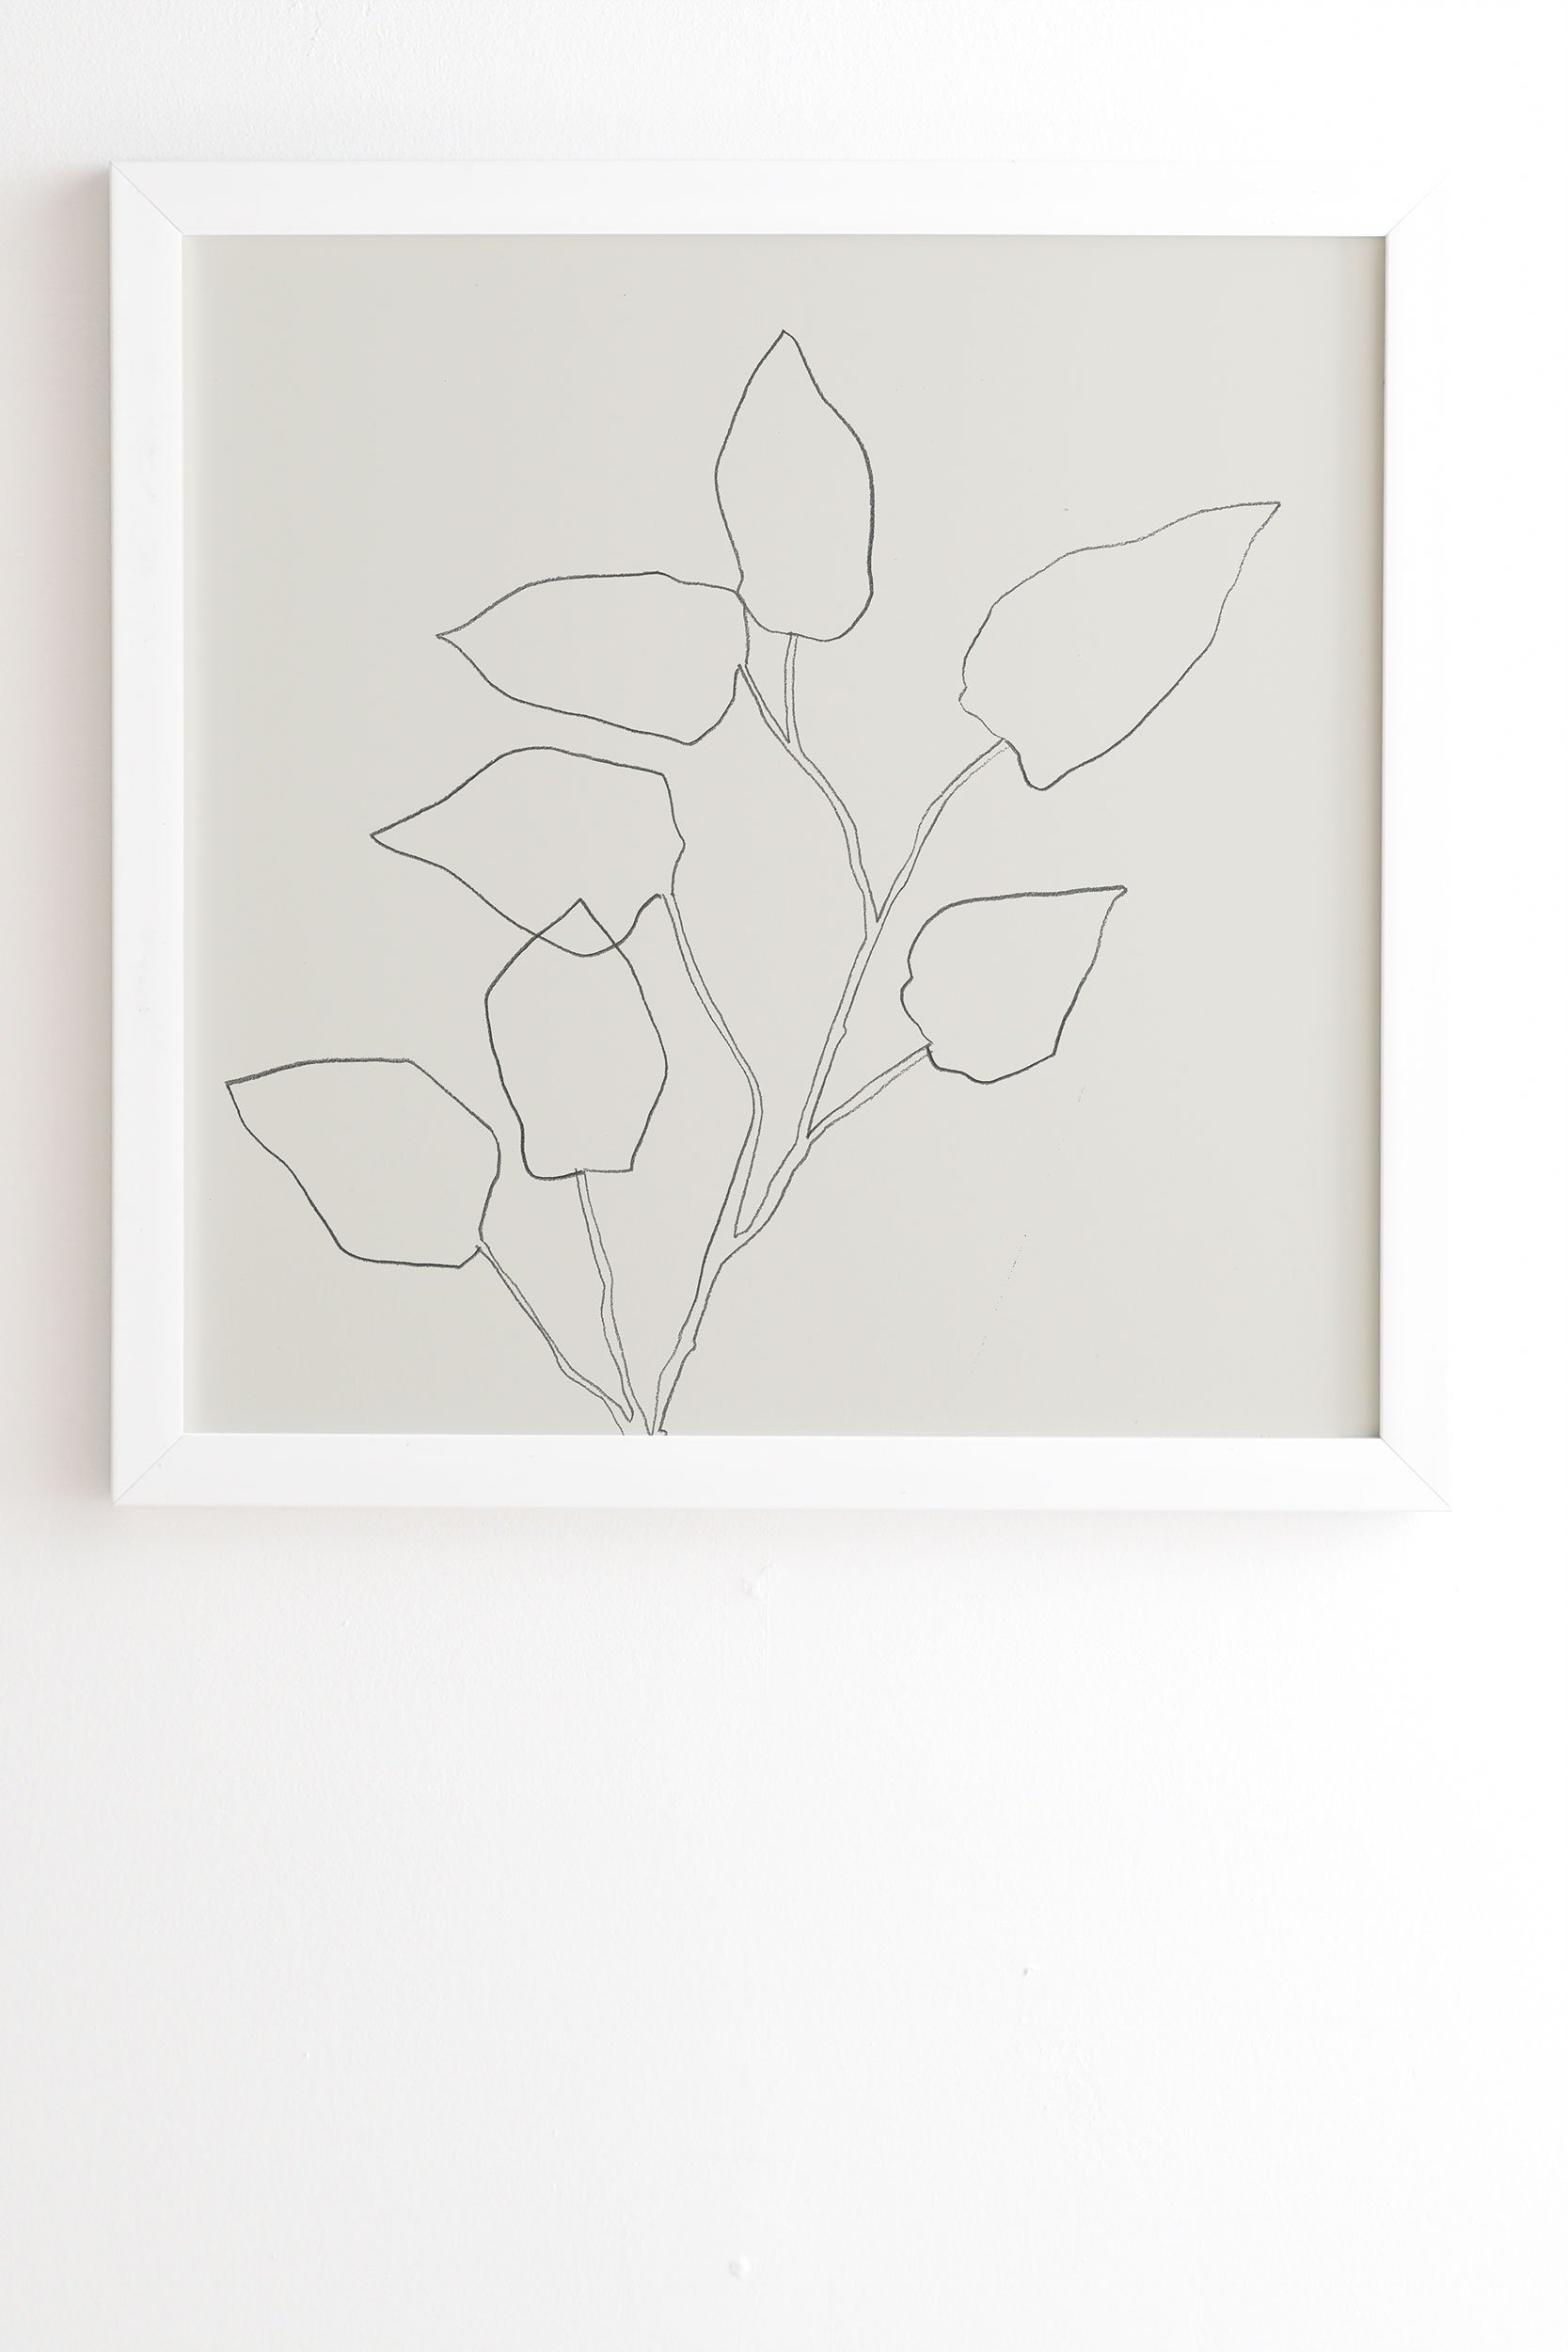 Floral Study No 5 by Megan Galante - Framed Wall Art Basic White 30" x 30" - Image 1